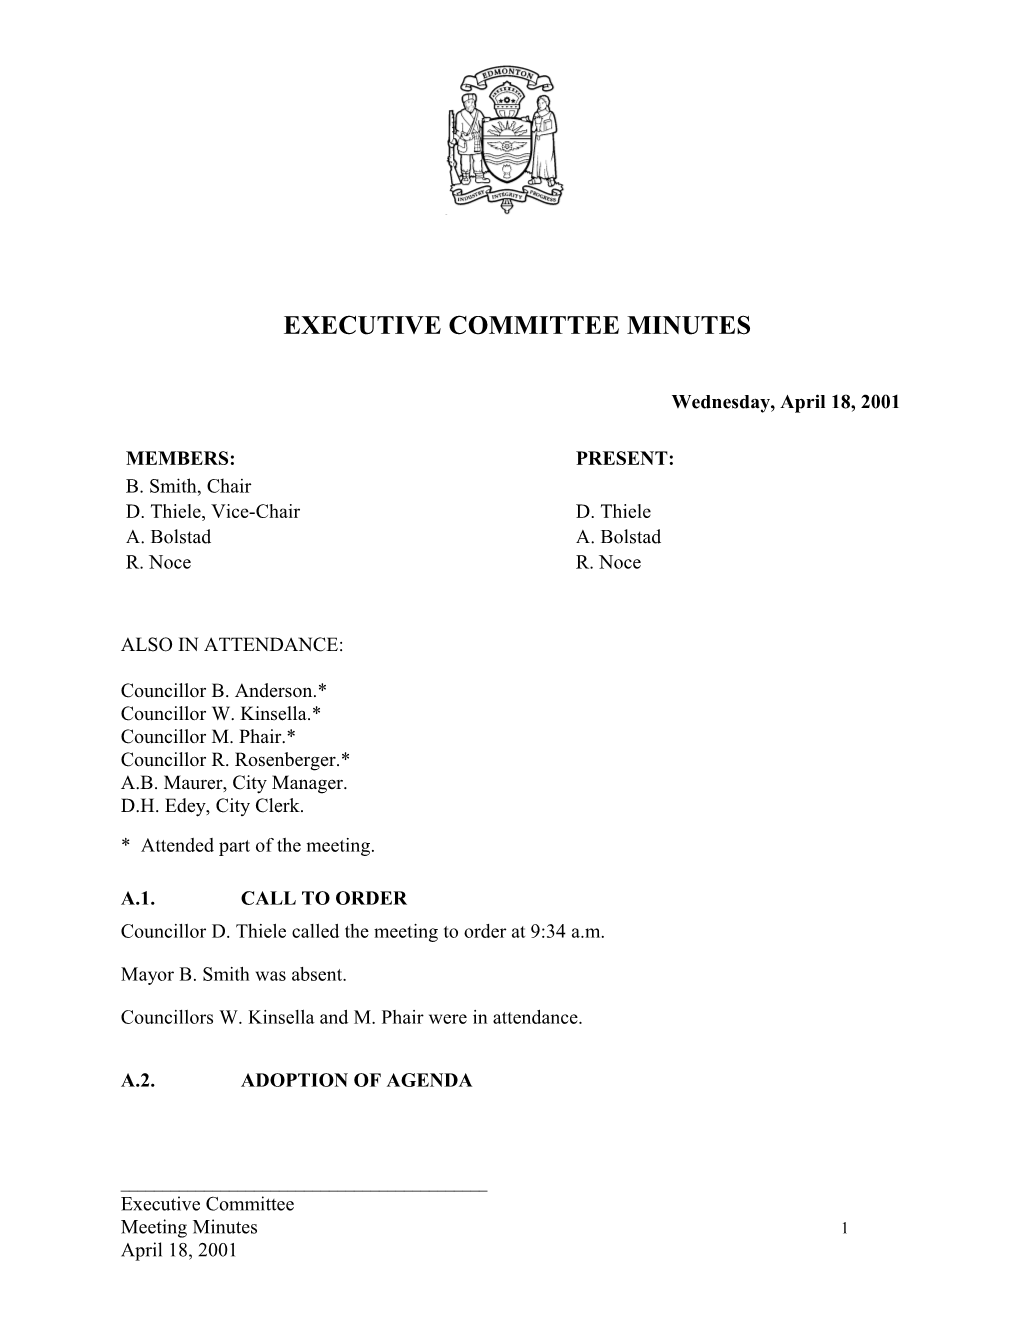 Minutes for Executive Committee April 18, 2001 Meeting